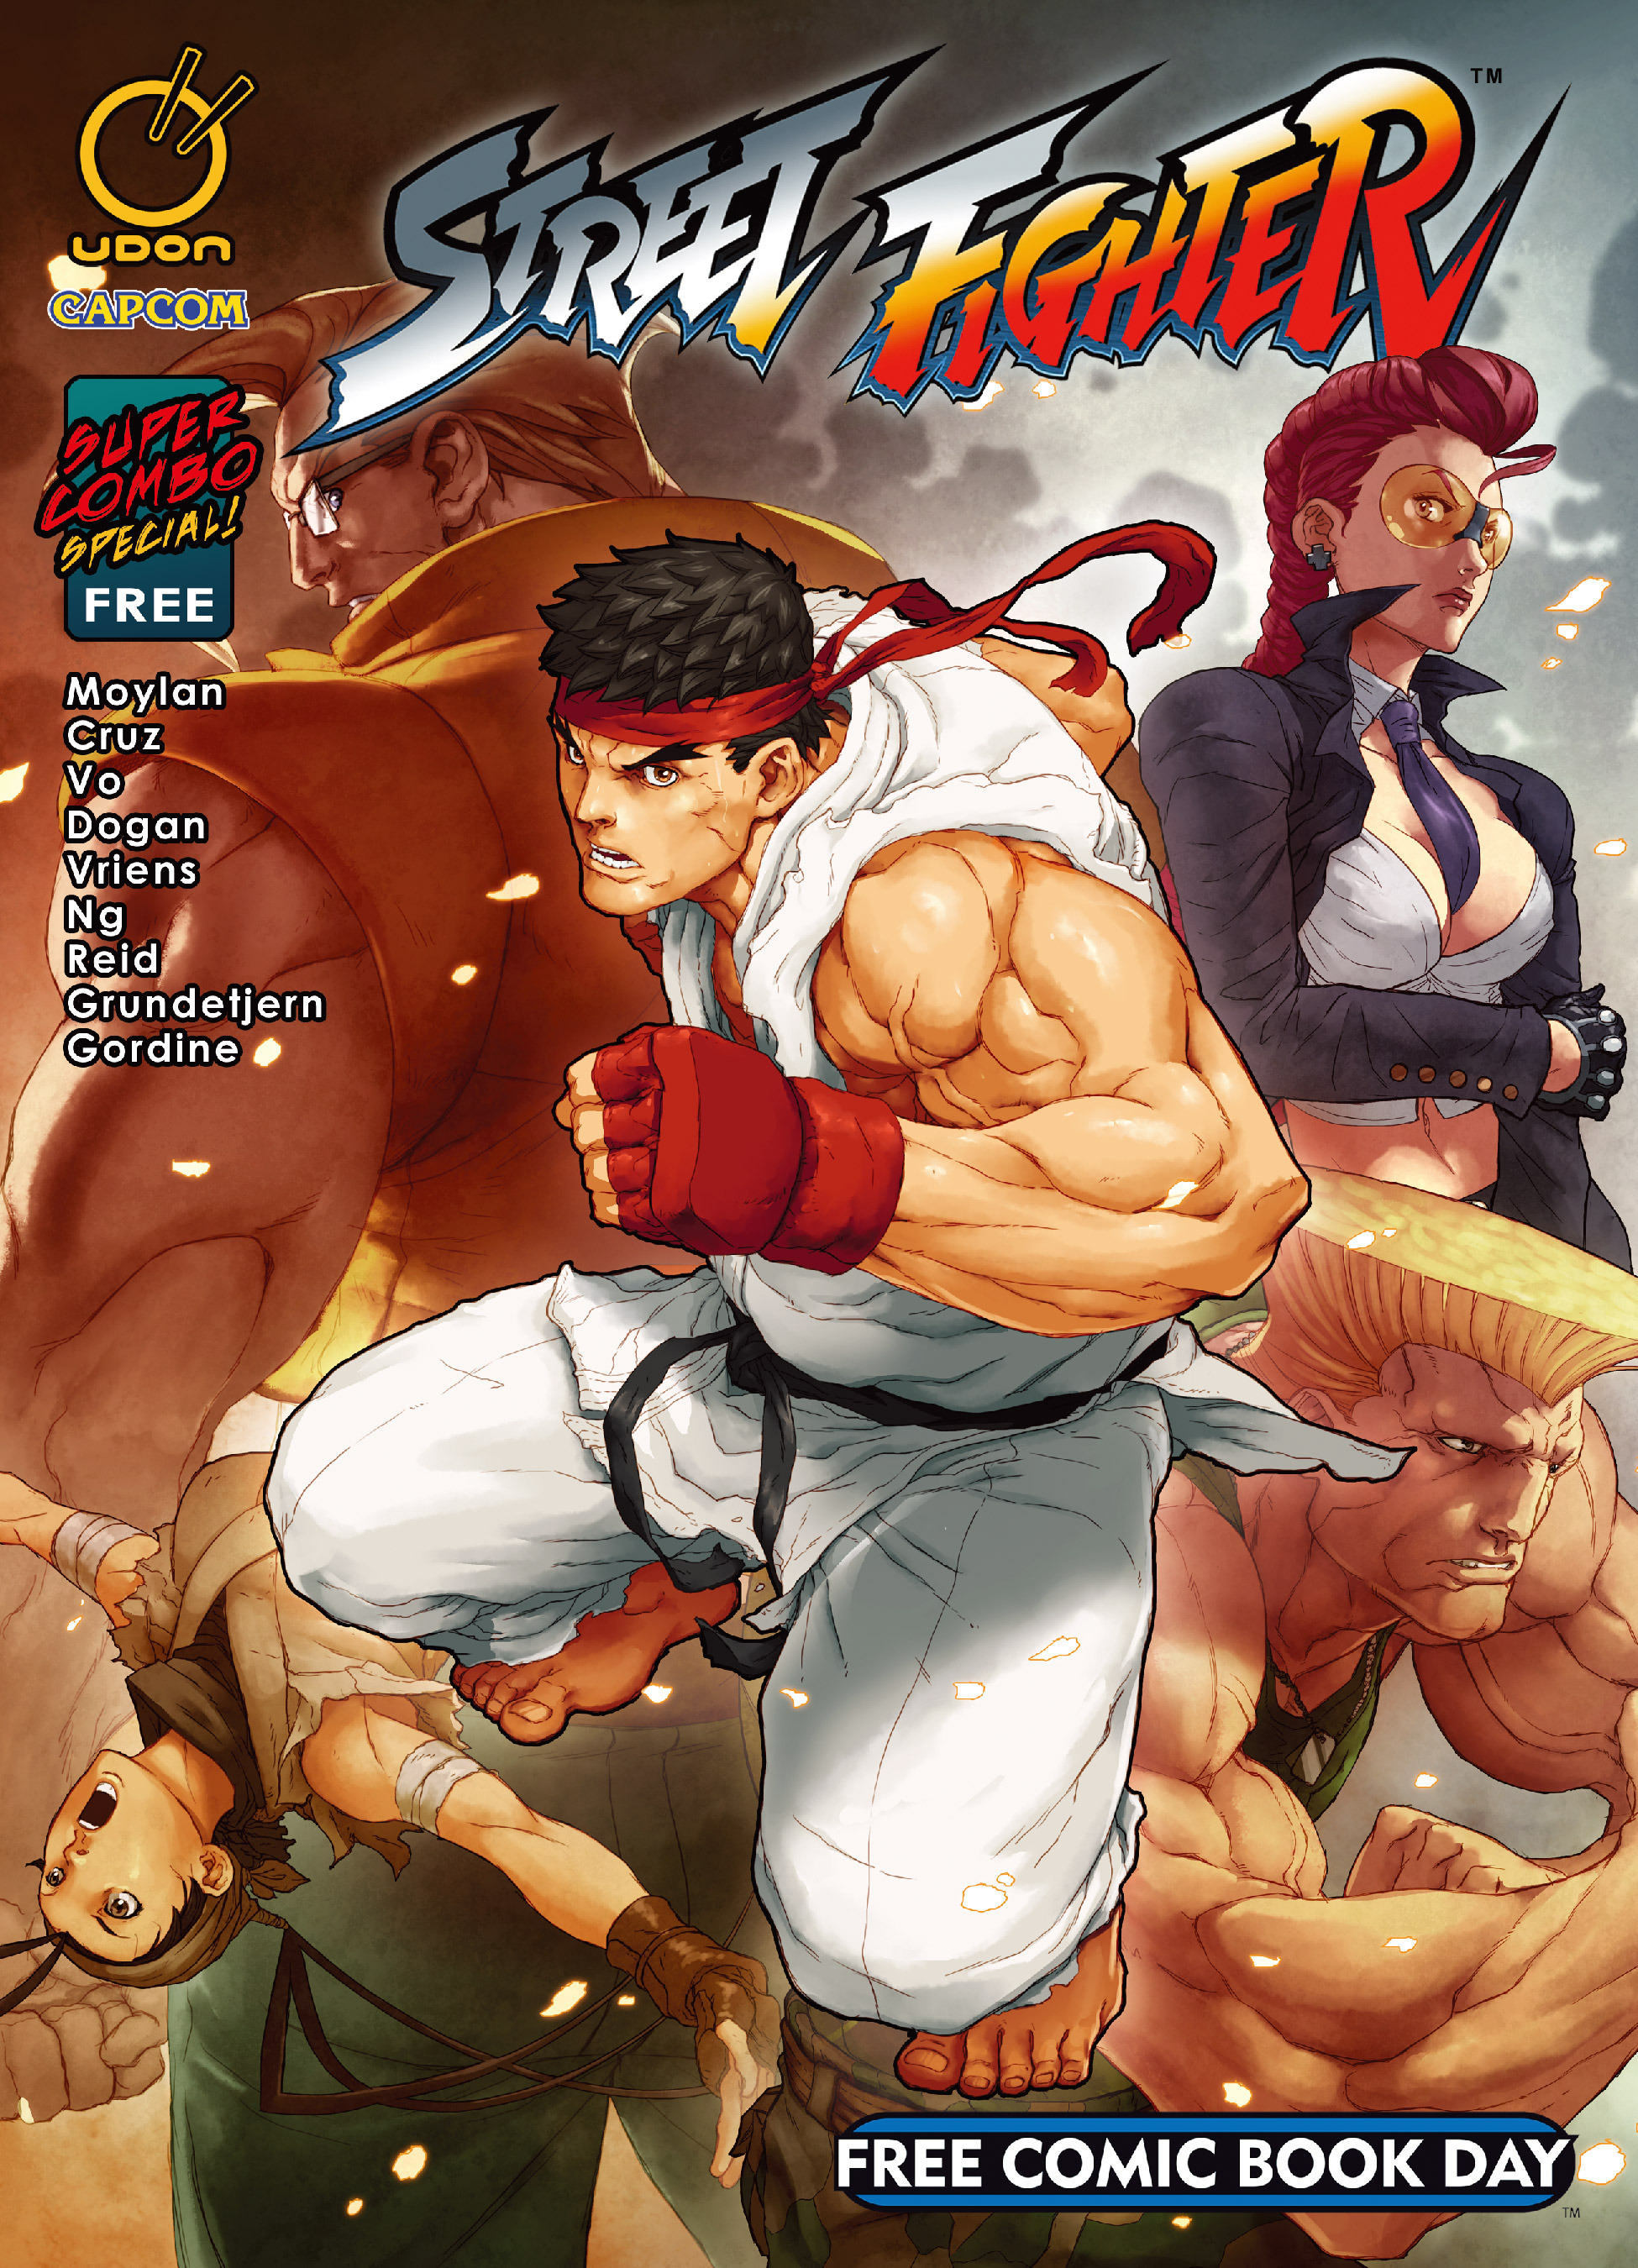 Read online Free Comic Book Day 2015 comic -  Issue # Street Fighter - Super Combo Special - 1